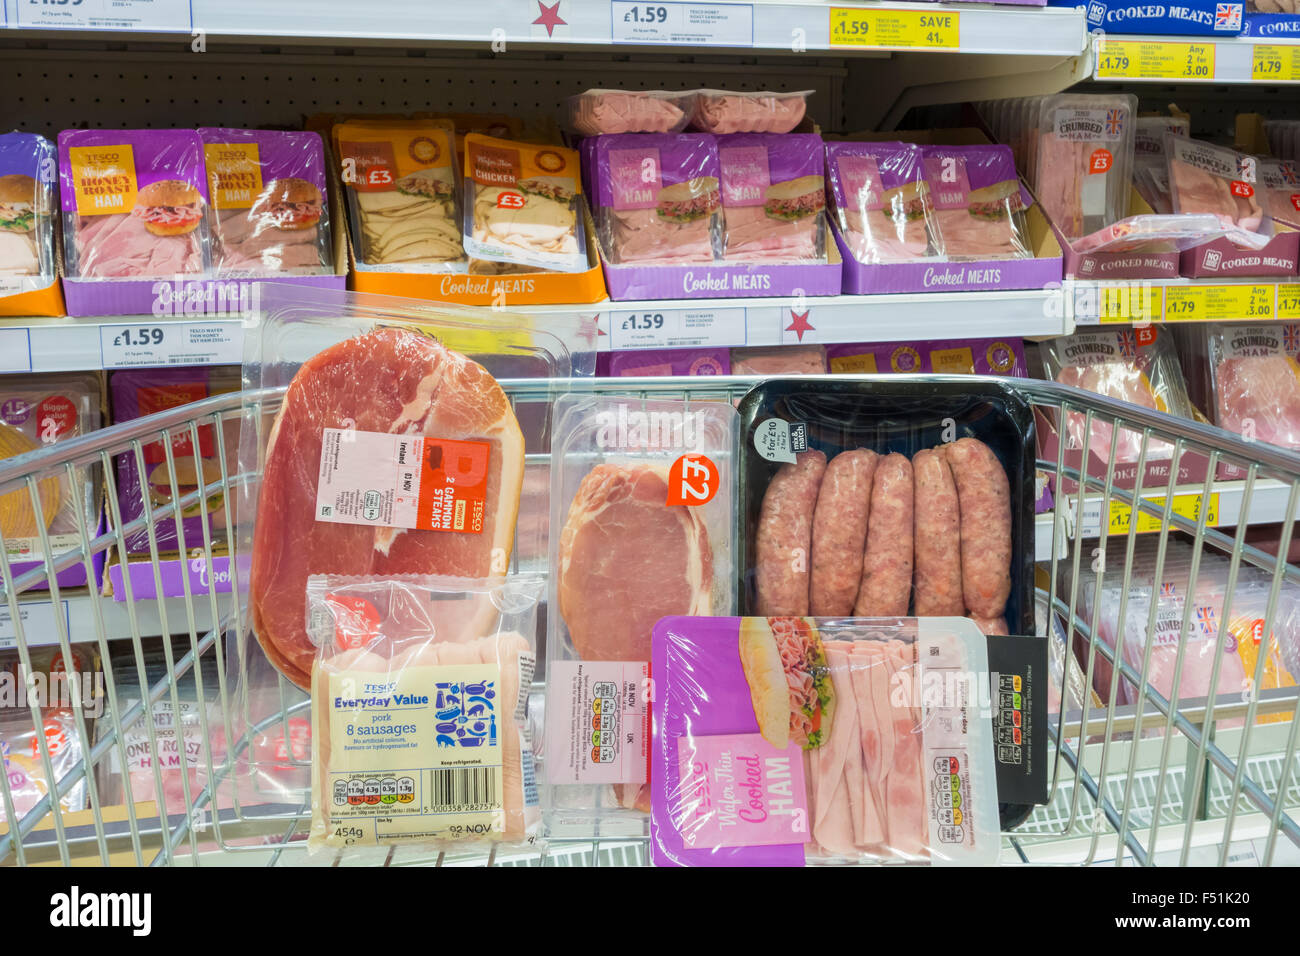 Processed meat (cooked ham), bacon, Gammon and sausages in plastic packaging in shopping trolley in Tesco supermarket. UK Stock Photo